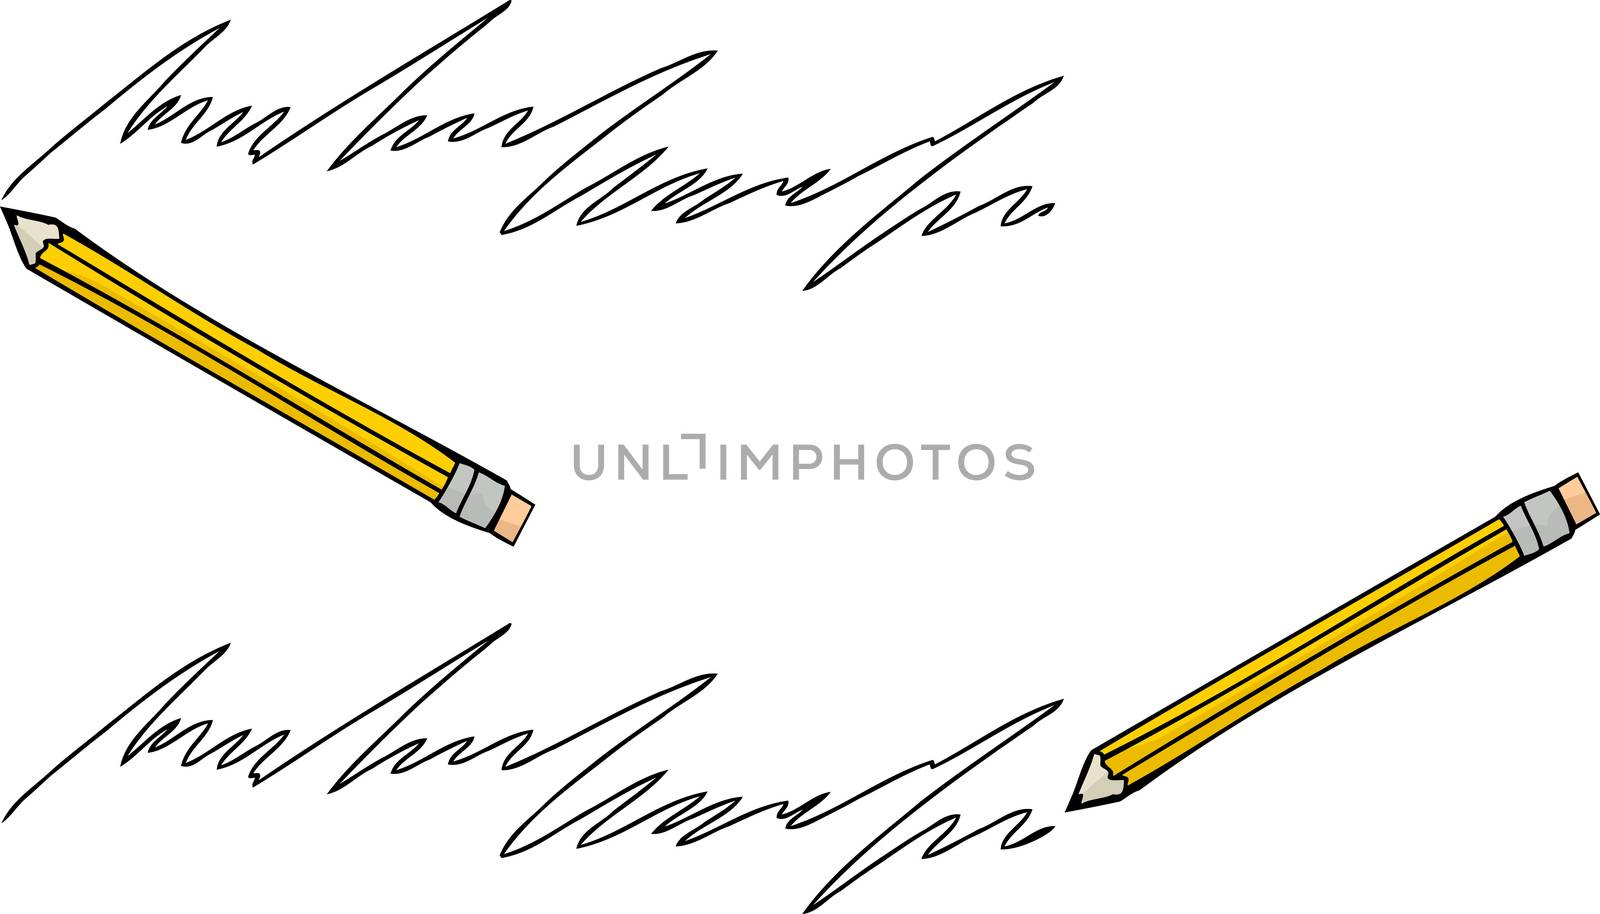 Pencil writing from both directions over white background